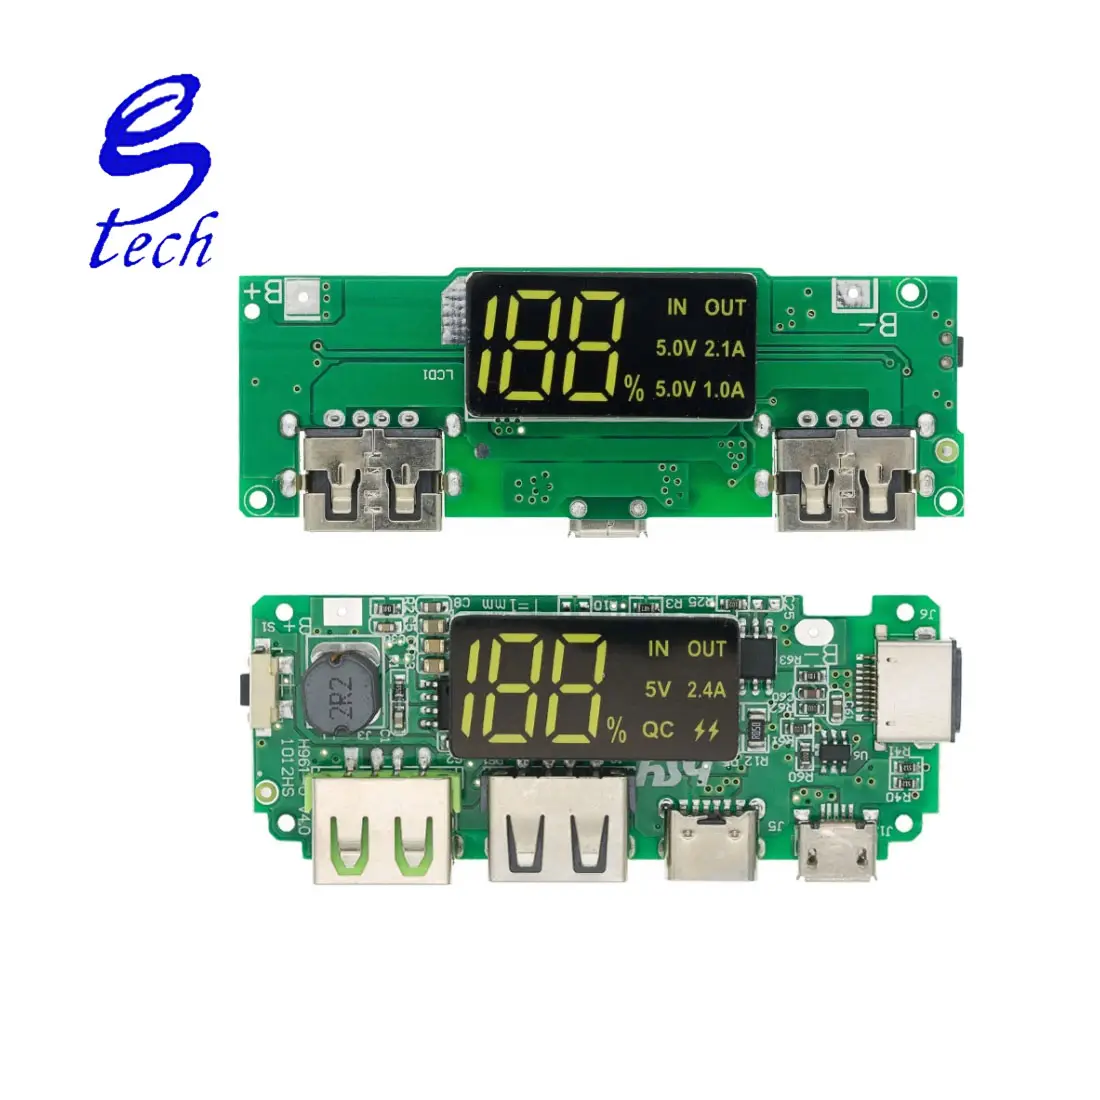 LED Dual USB 5V 2.4A Type-C USB Mobile Power Bank 18650 Charging Module Lithium Battery Charger Board Circuit